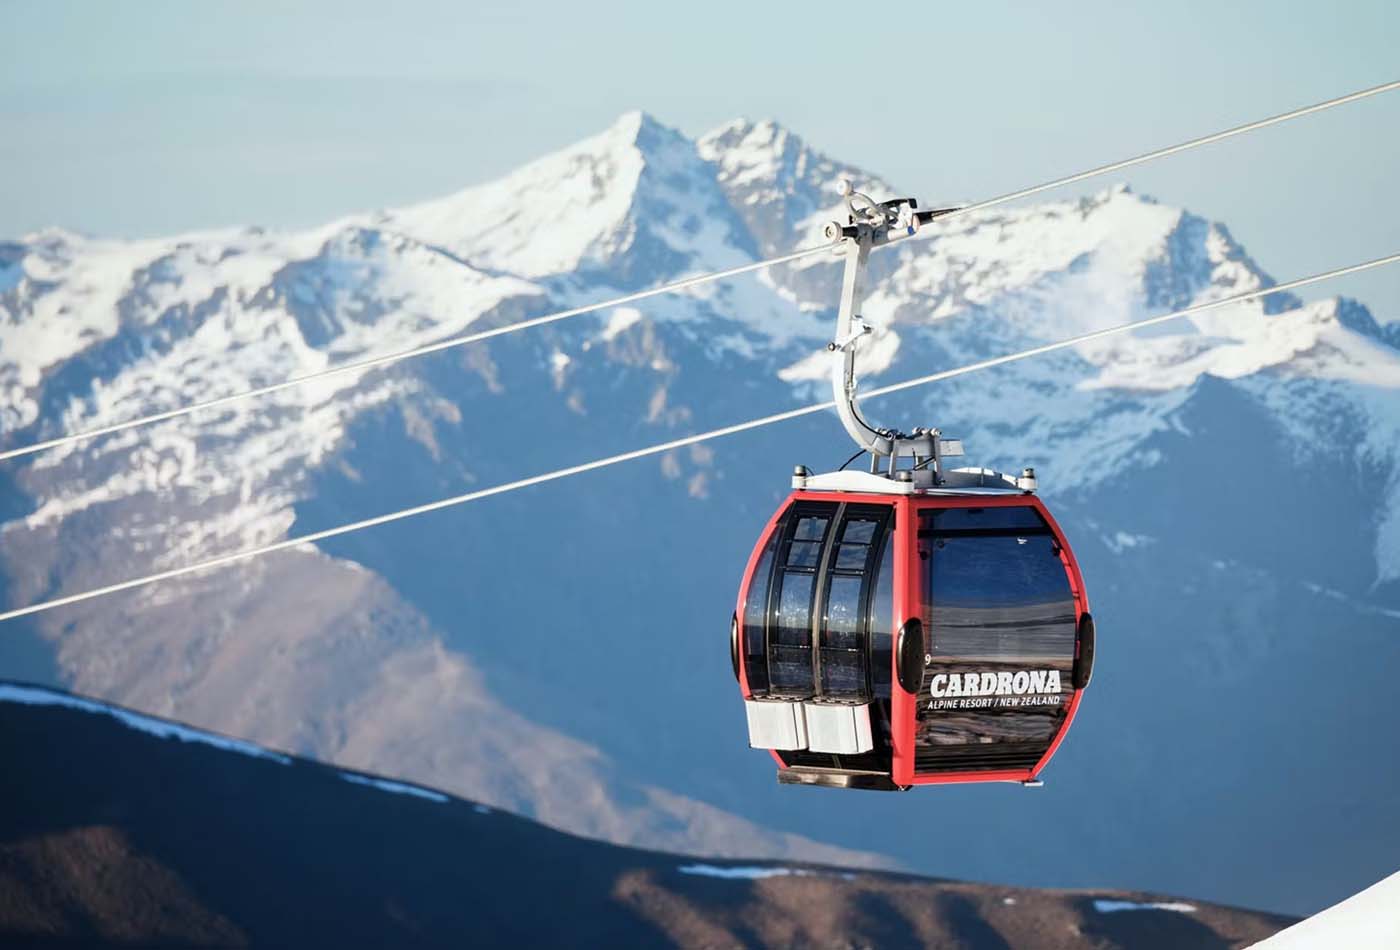 Close up of a gondola going up a mountain